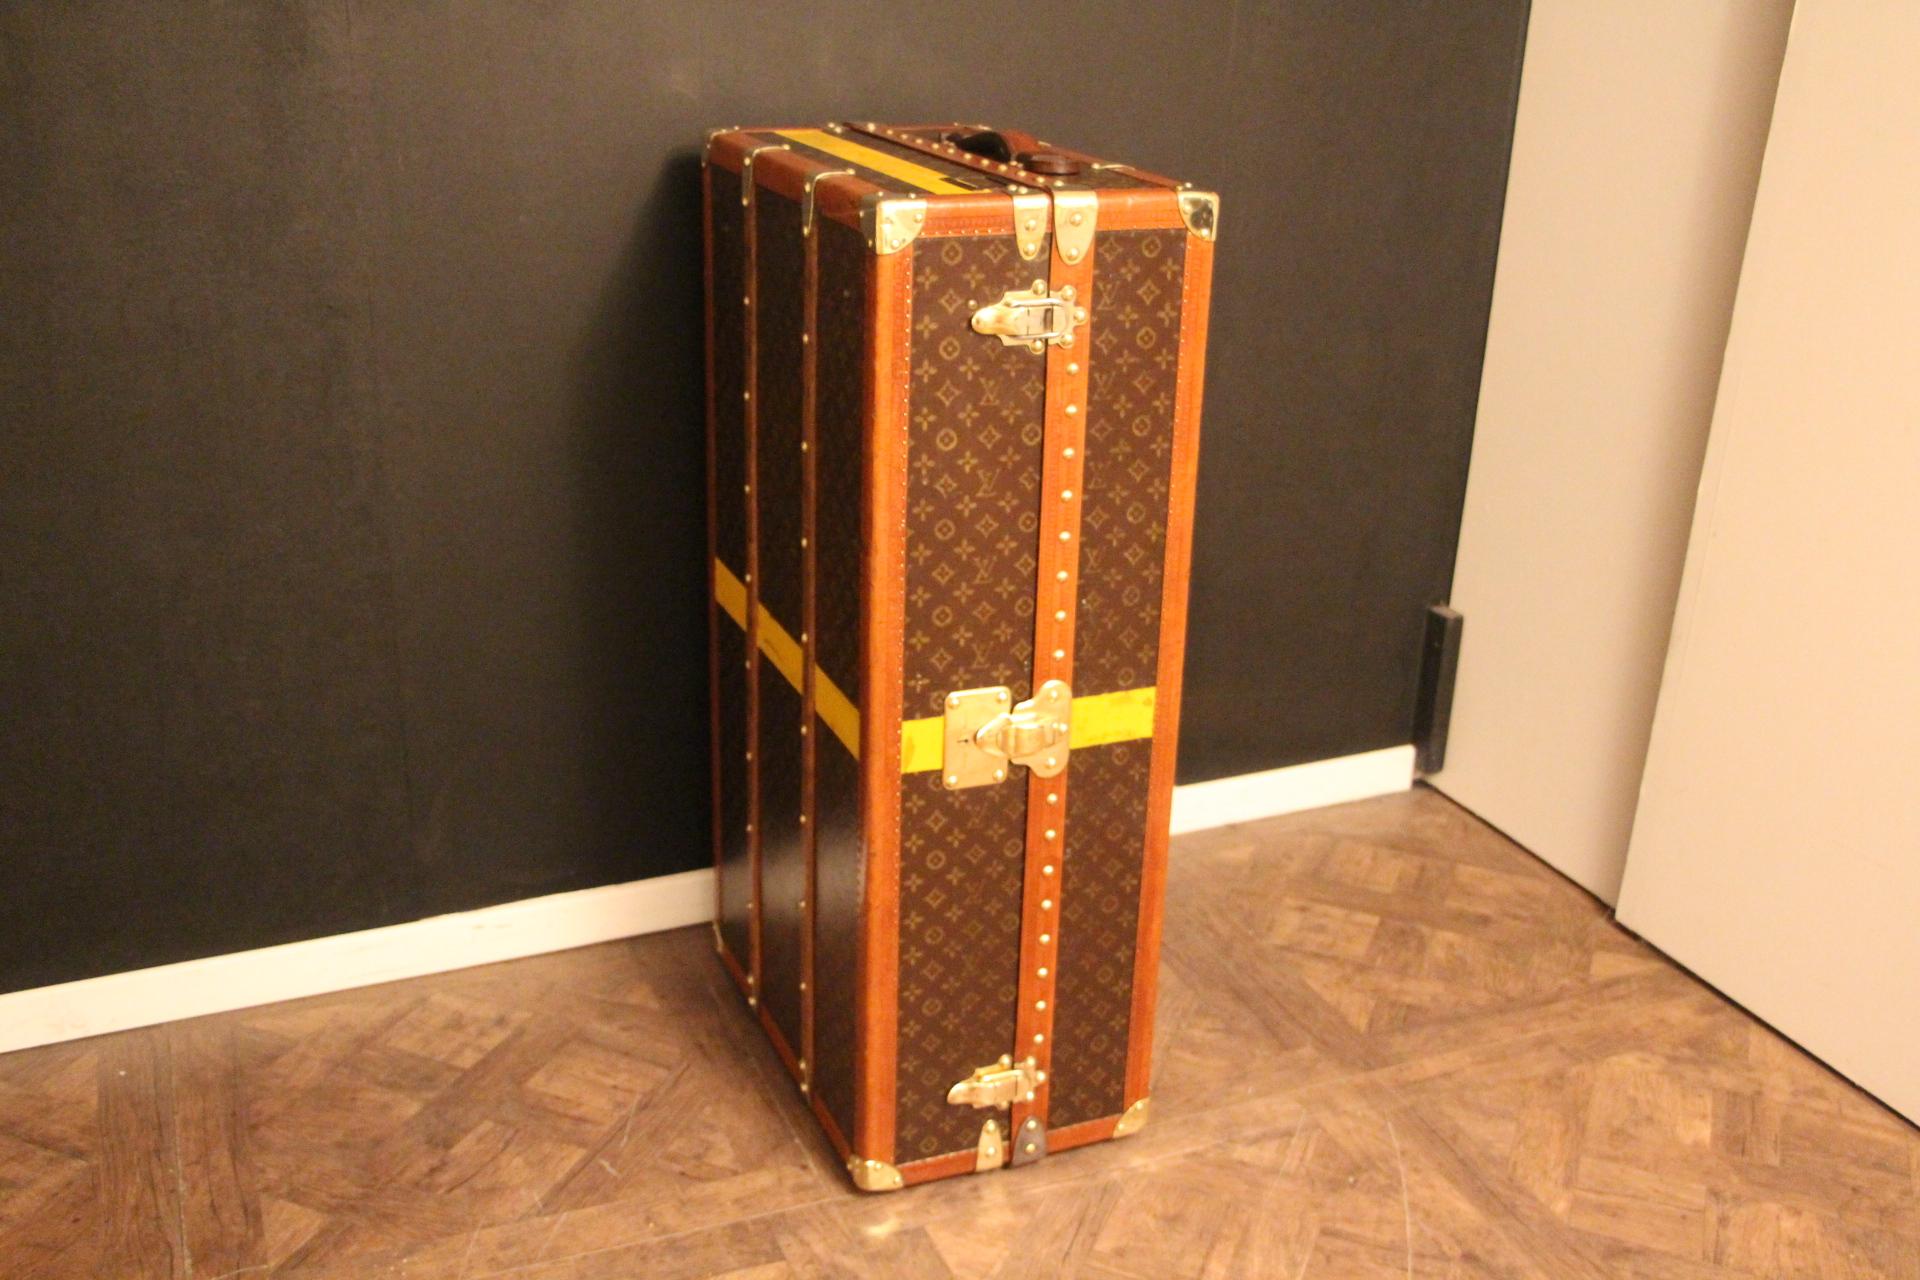 This superb Louis Vuitton wardrobe features stenciled monogram canvas, lozine trims and solid brass lock, clasps and studs.
Lock,clasps and studs are all marked Louis Vuitton. Customised painted stub all around adds some personality and